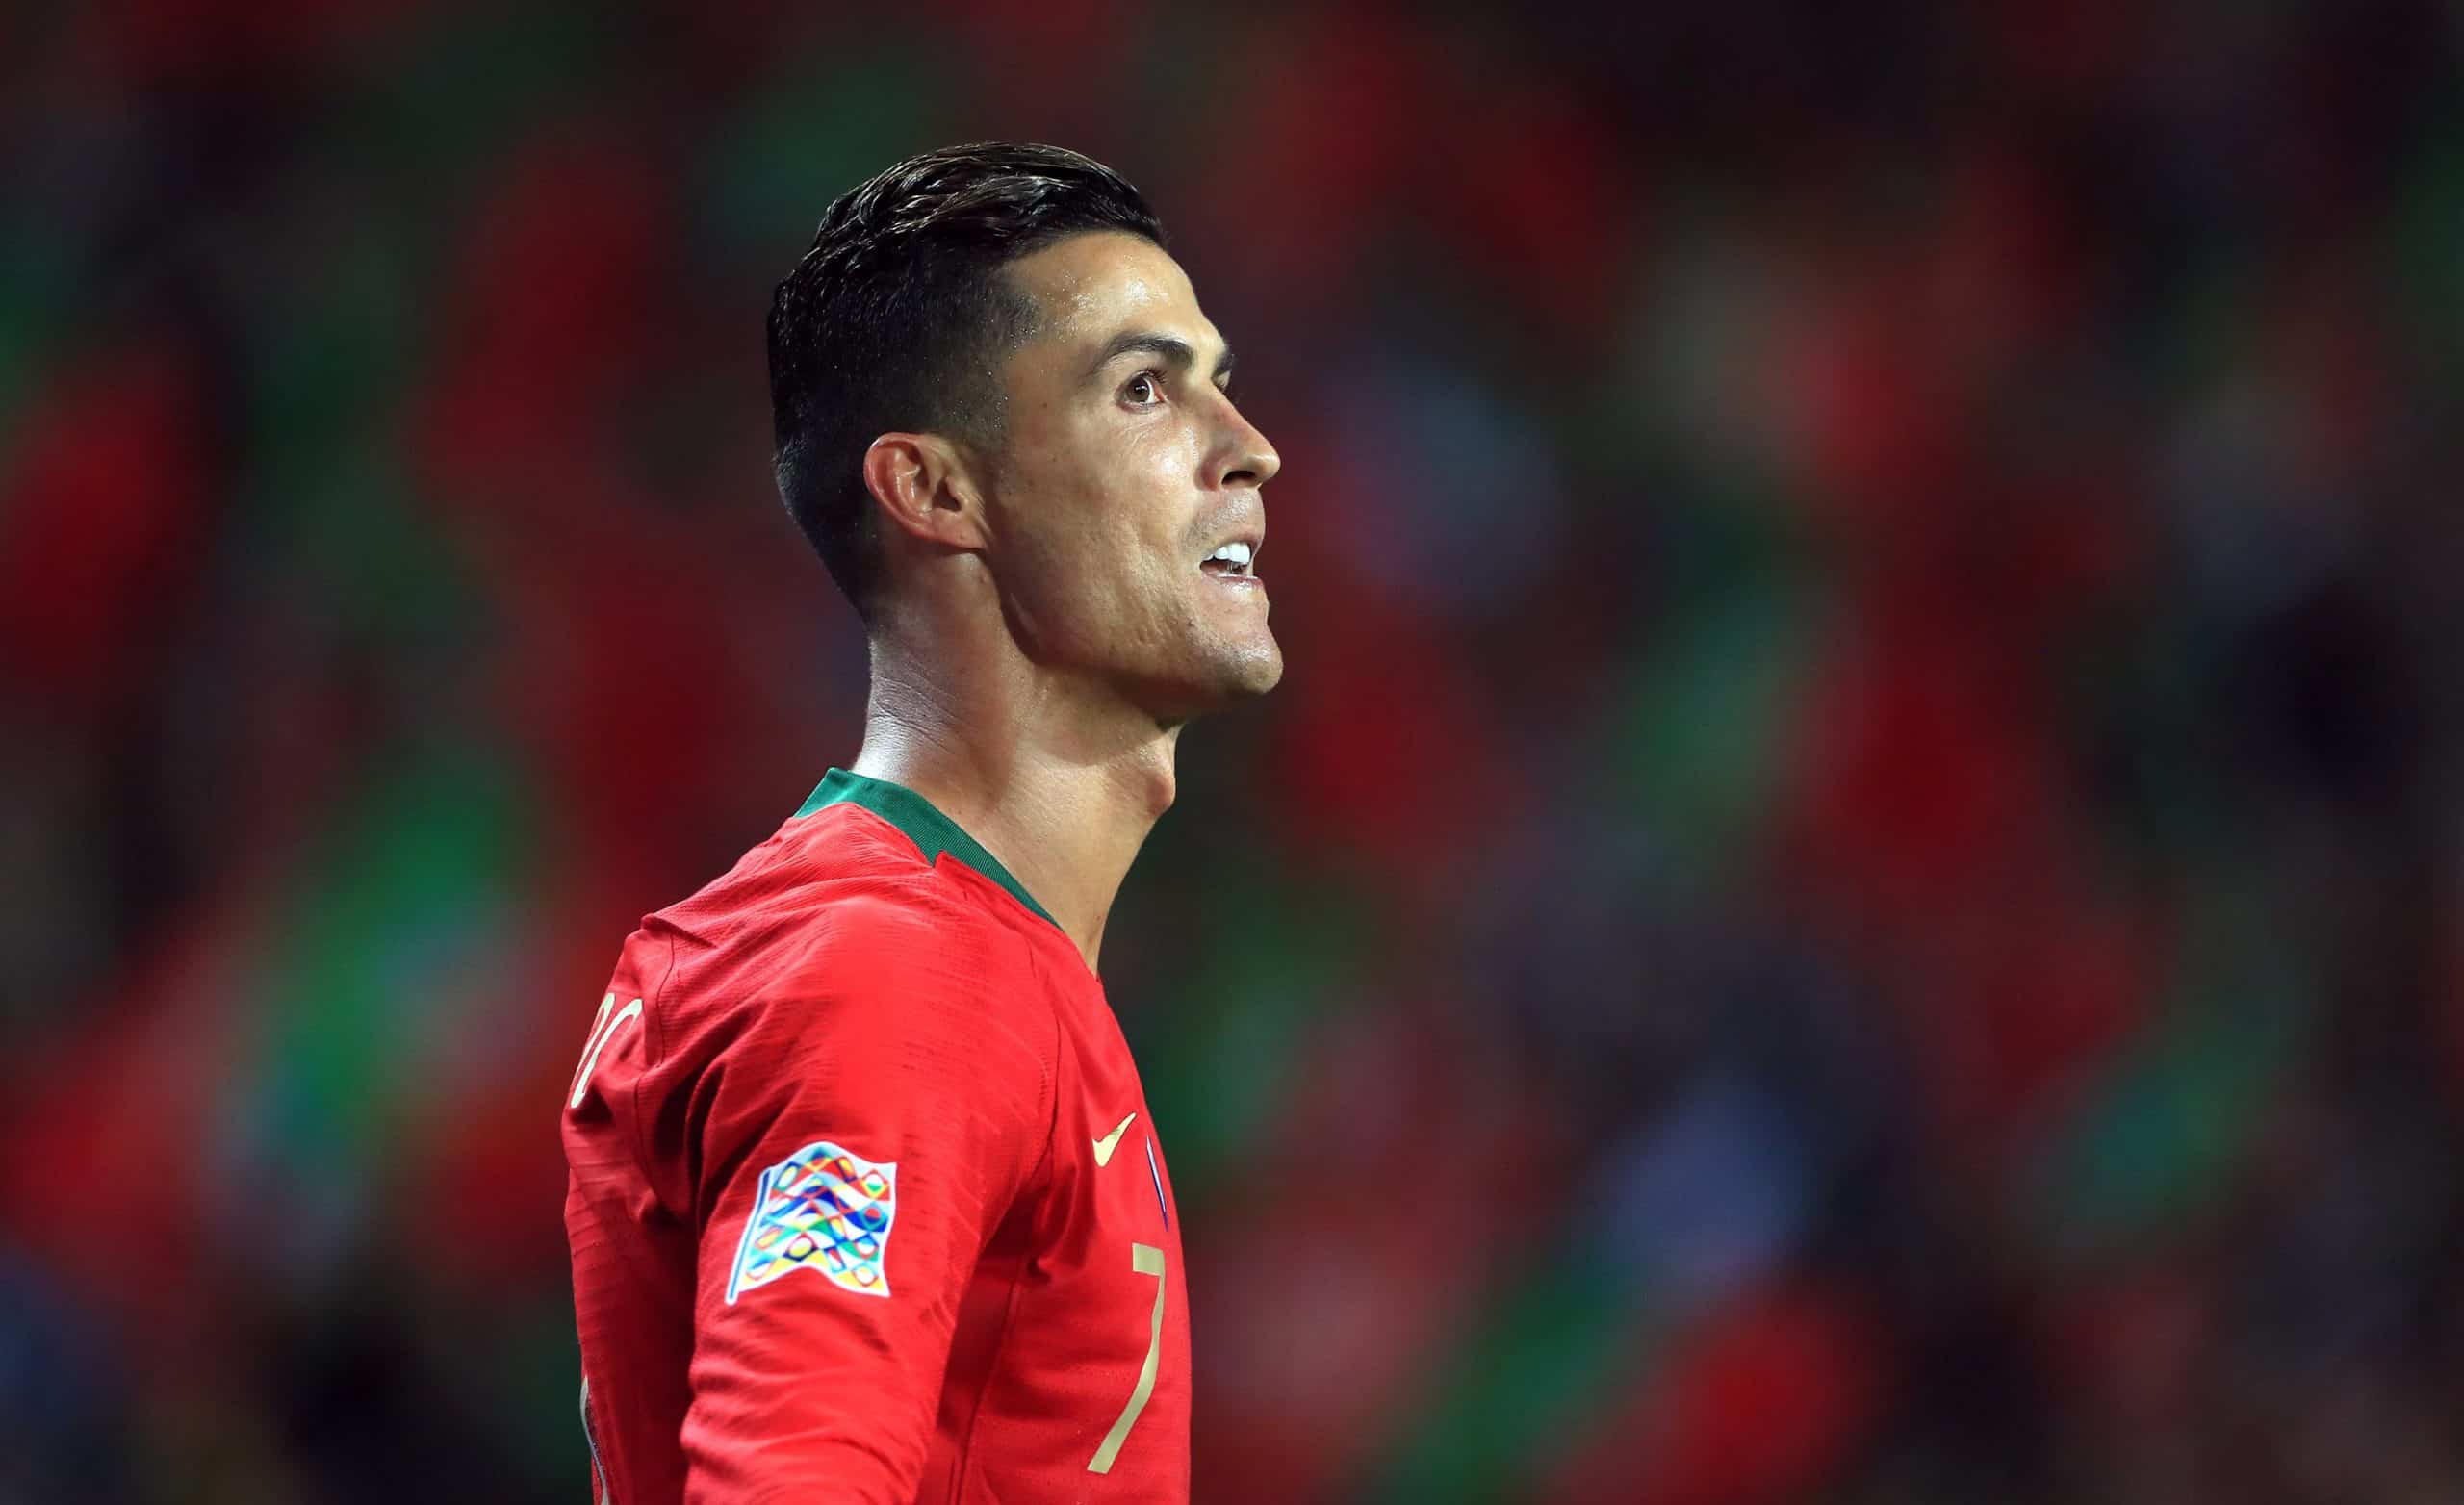 Cristiano Ronaldo: Banner flies over ground referring to allegations of rape made against star